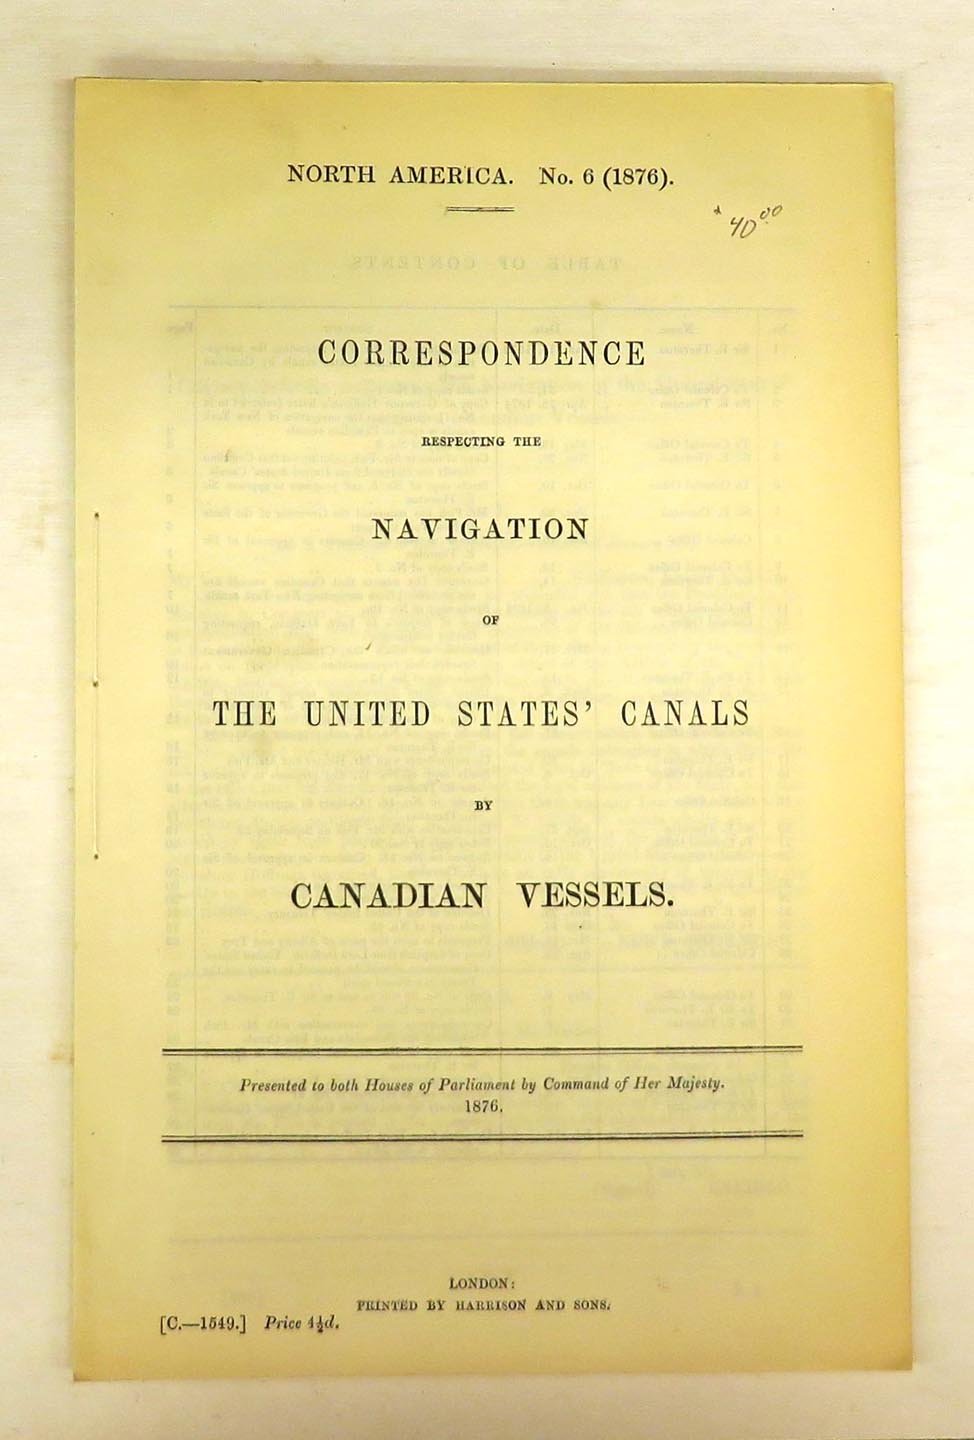 Correspondence Respecting the Navigation of the United States' Canals by Canadian Vessels